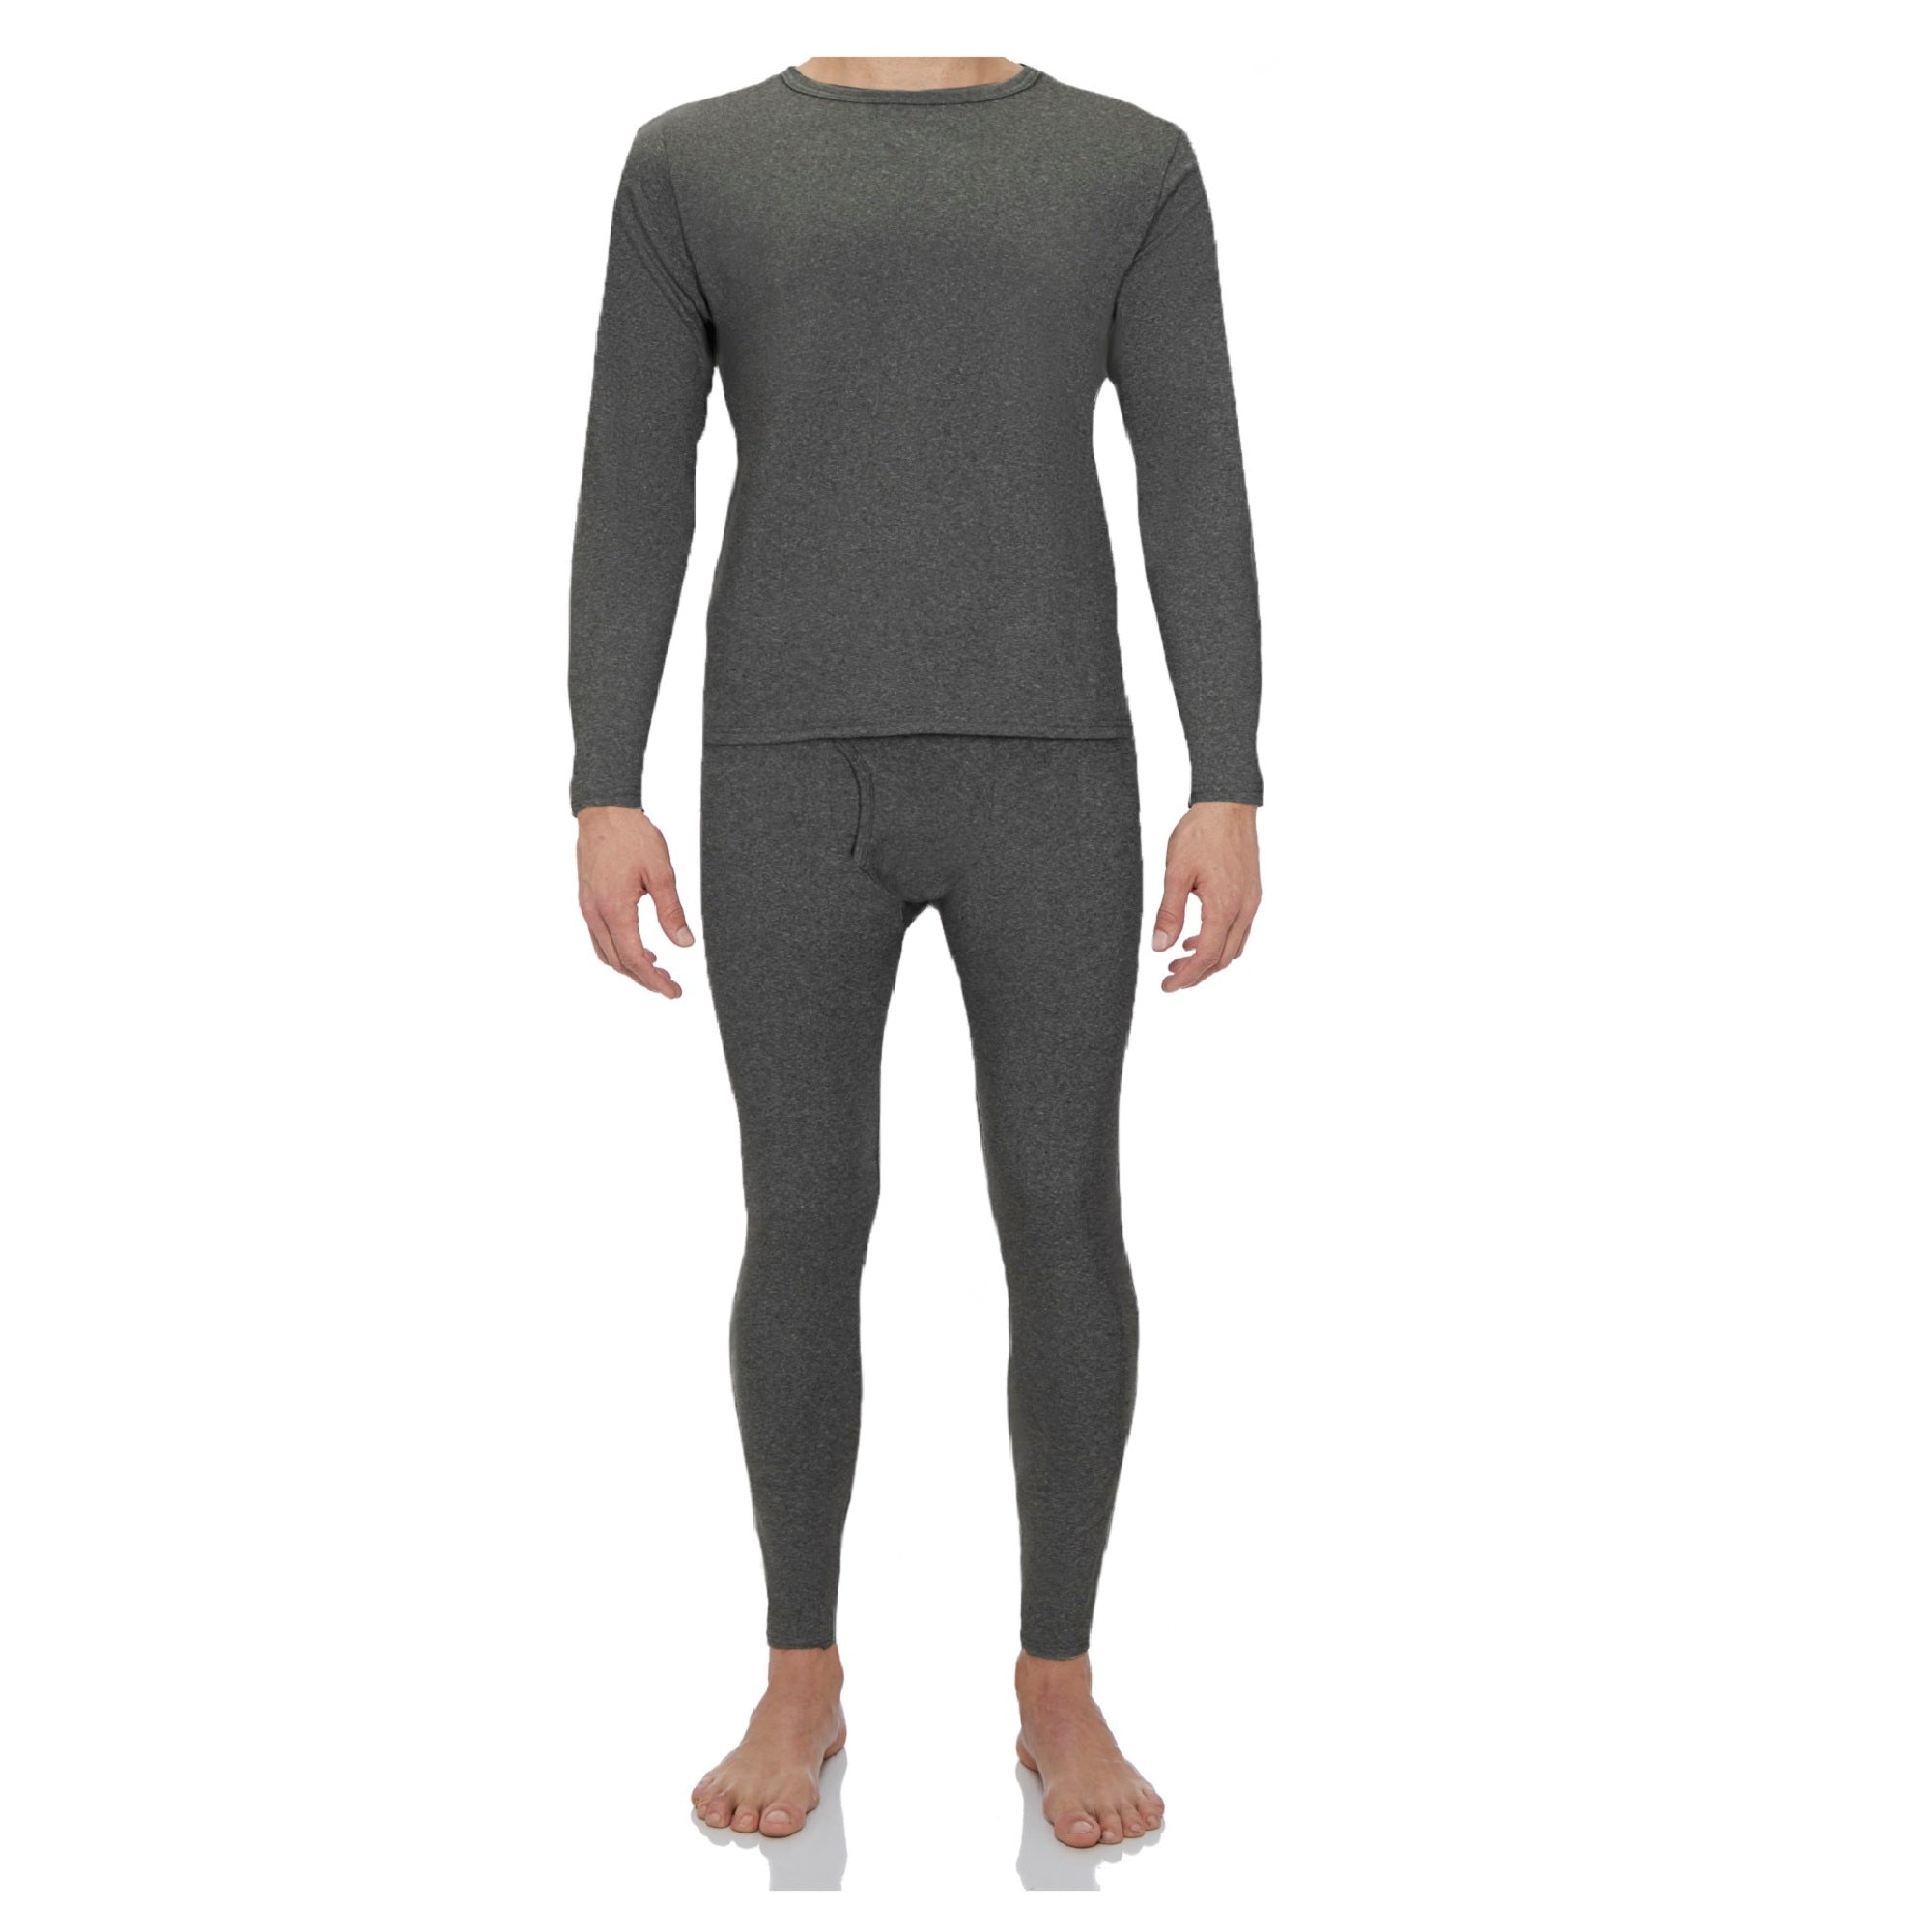 Intimates & Sleepwear, Rocky Thermal Underwear For Women Heavyweight And  Midweight Thermal Long Johns